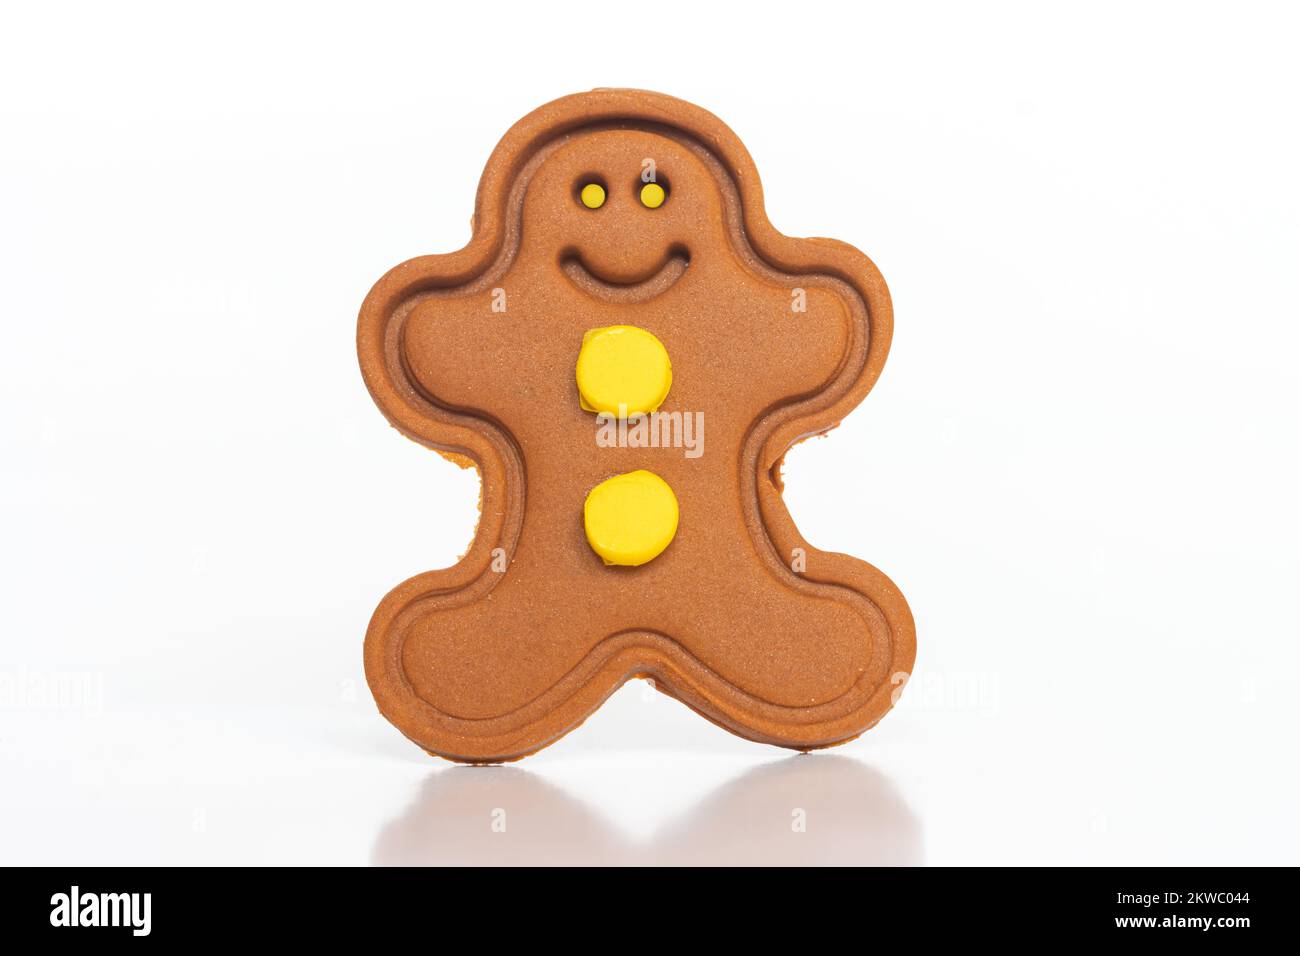 Gingerbread man figure with yellow eyes on a white background Stock Photo